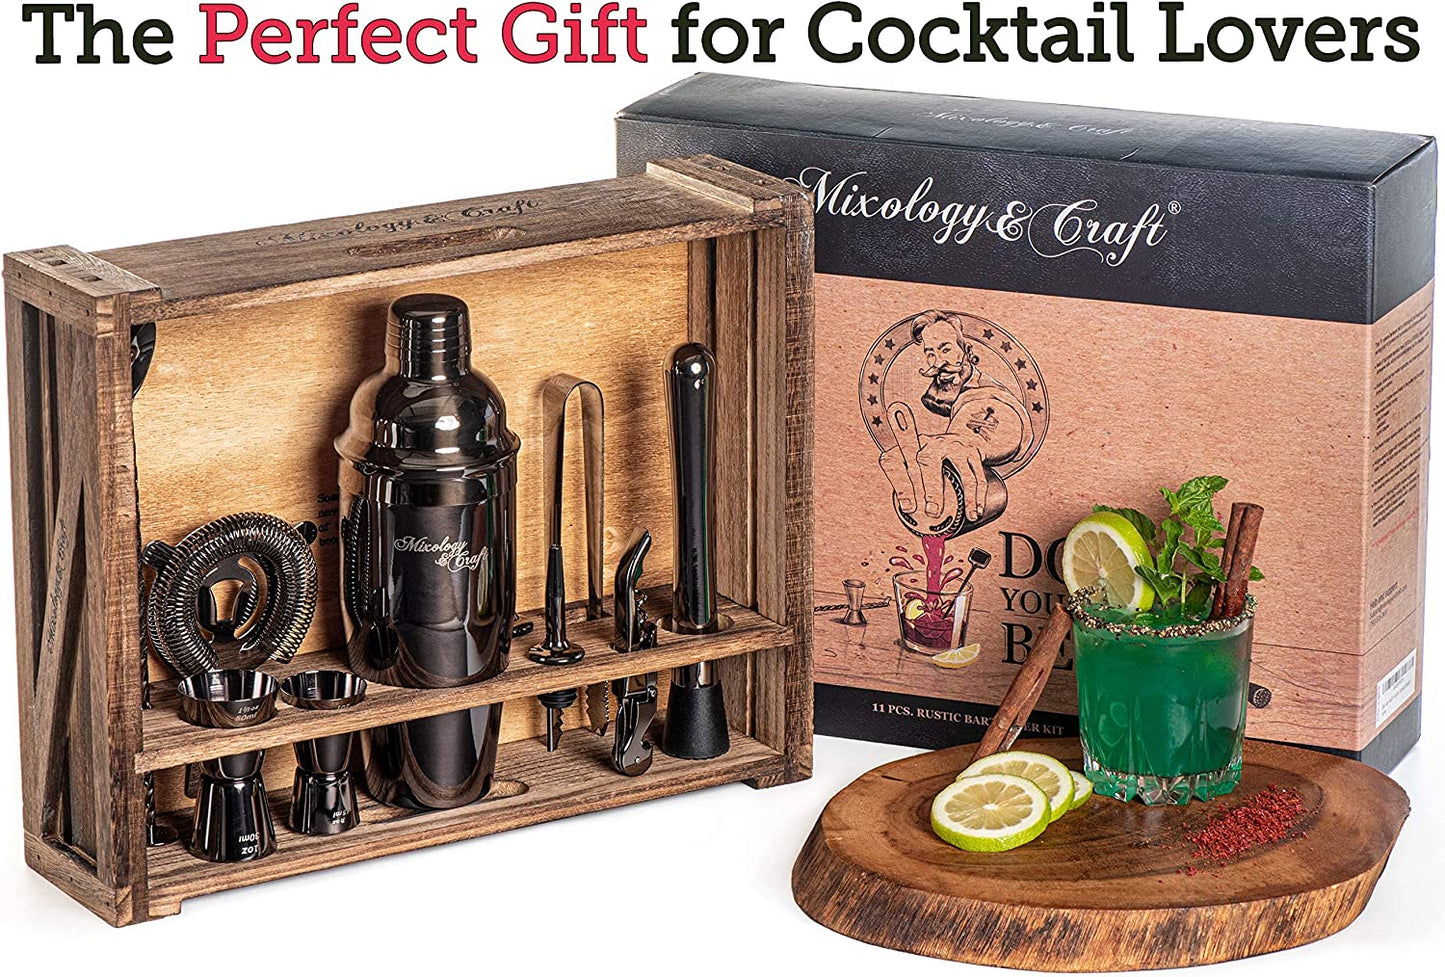 Bartender Kit: 11-Piece Bar Tool Set with Rustic Wood Stand | Perfect Home Bartending Kit and Cocktail Shaker Set for an Awesome Drink Mixing Experience (Gun-Metal Black)